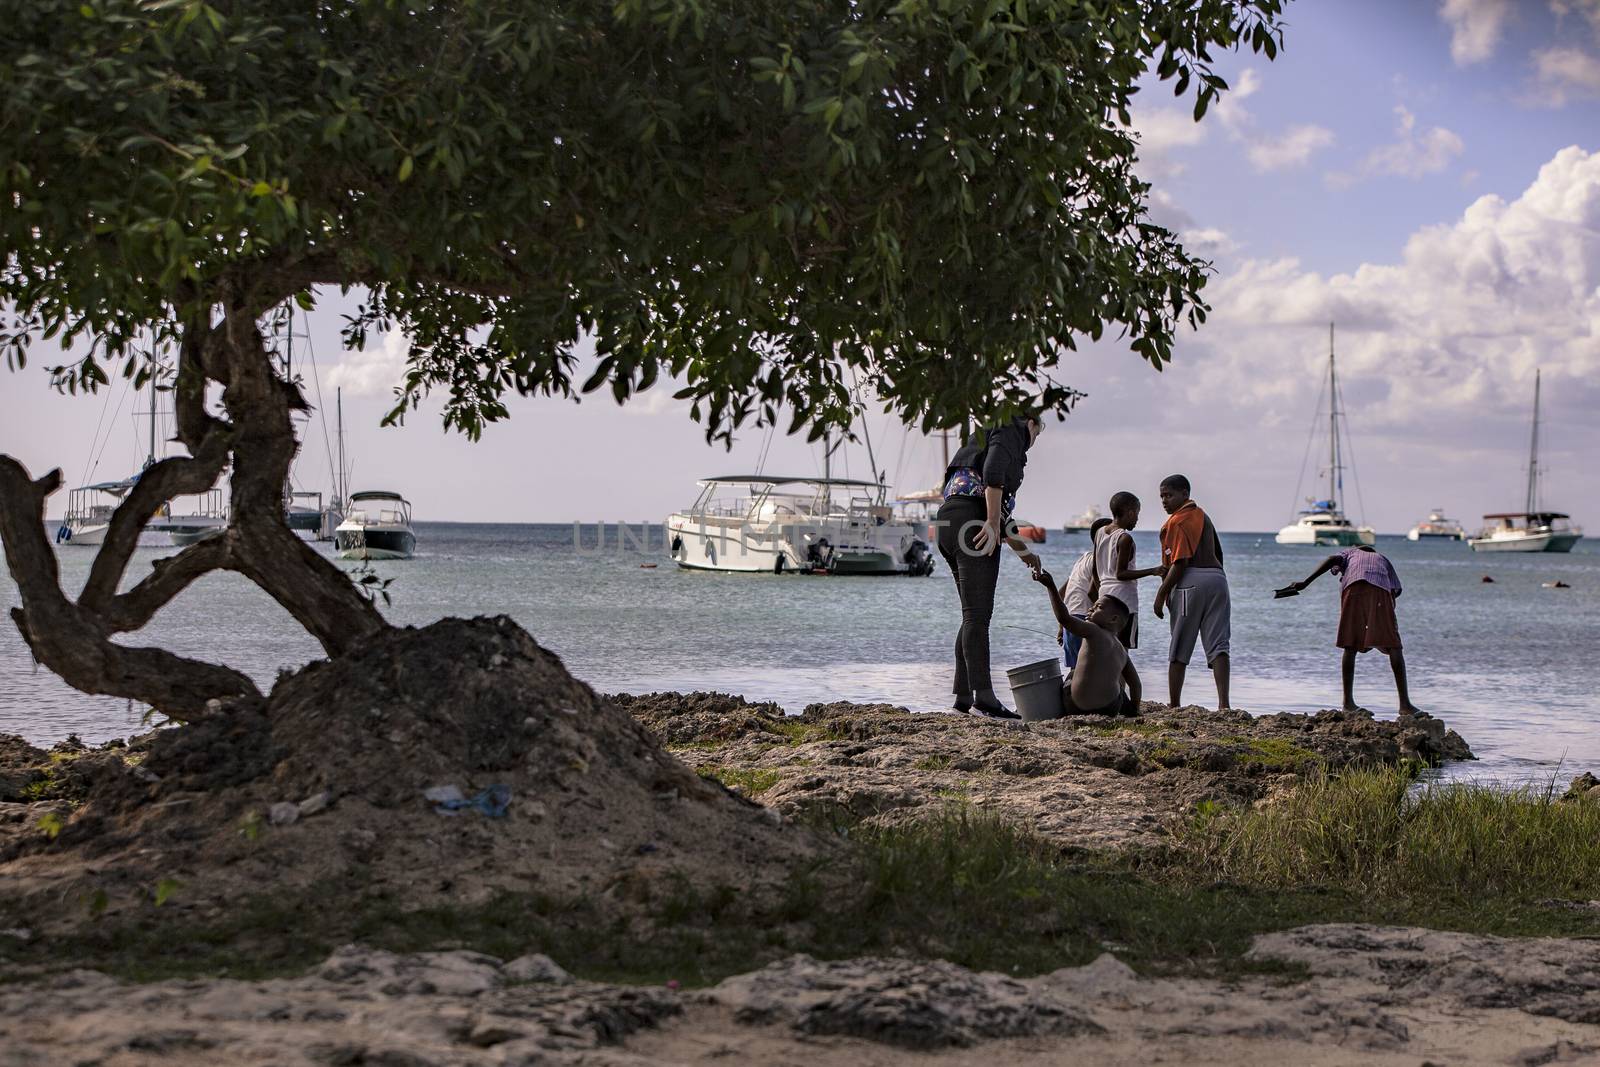 Poor Dominican children play in Bayahibe 7 by pippocarlot